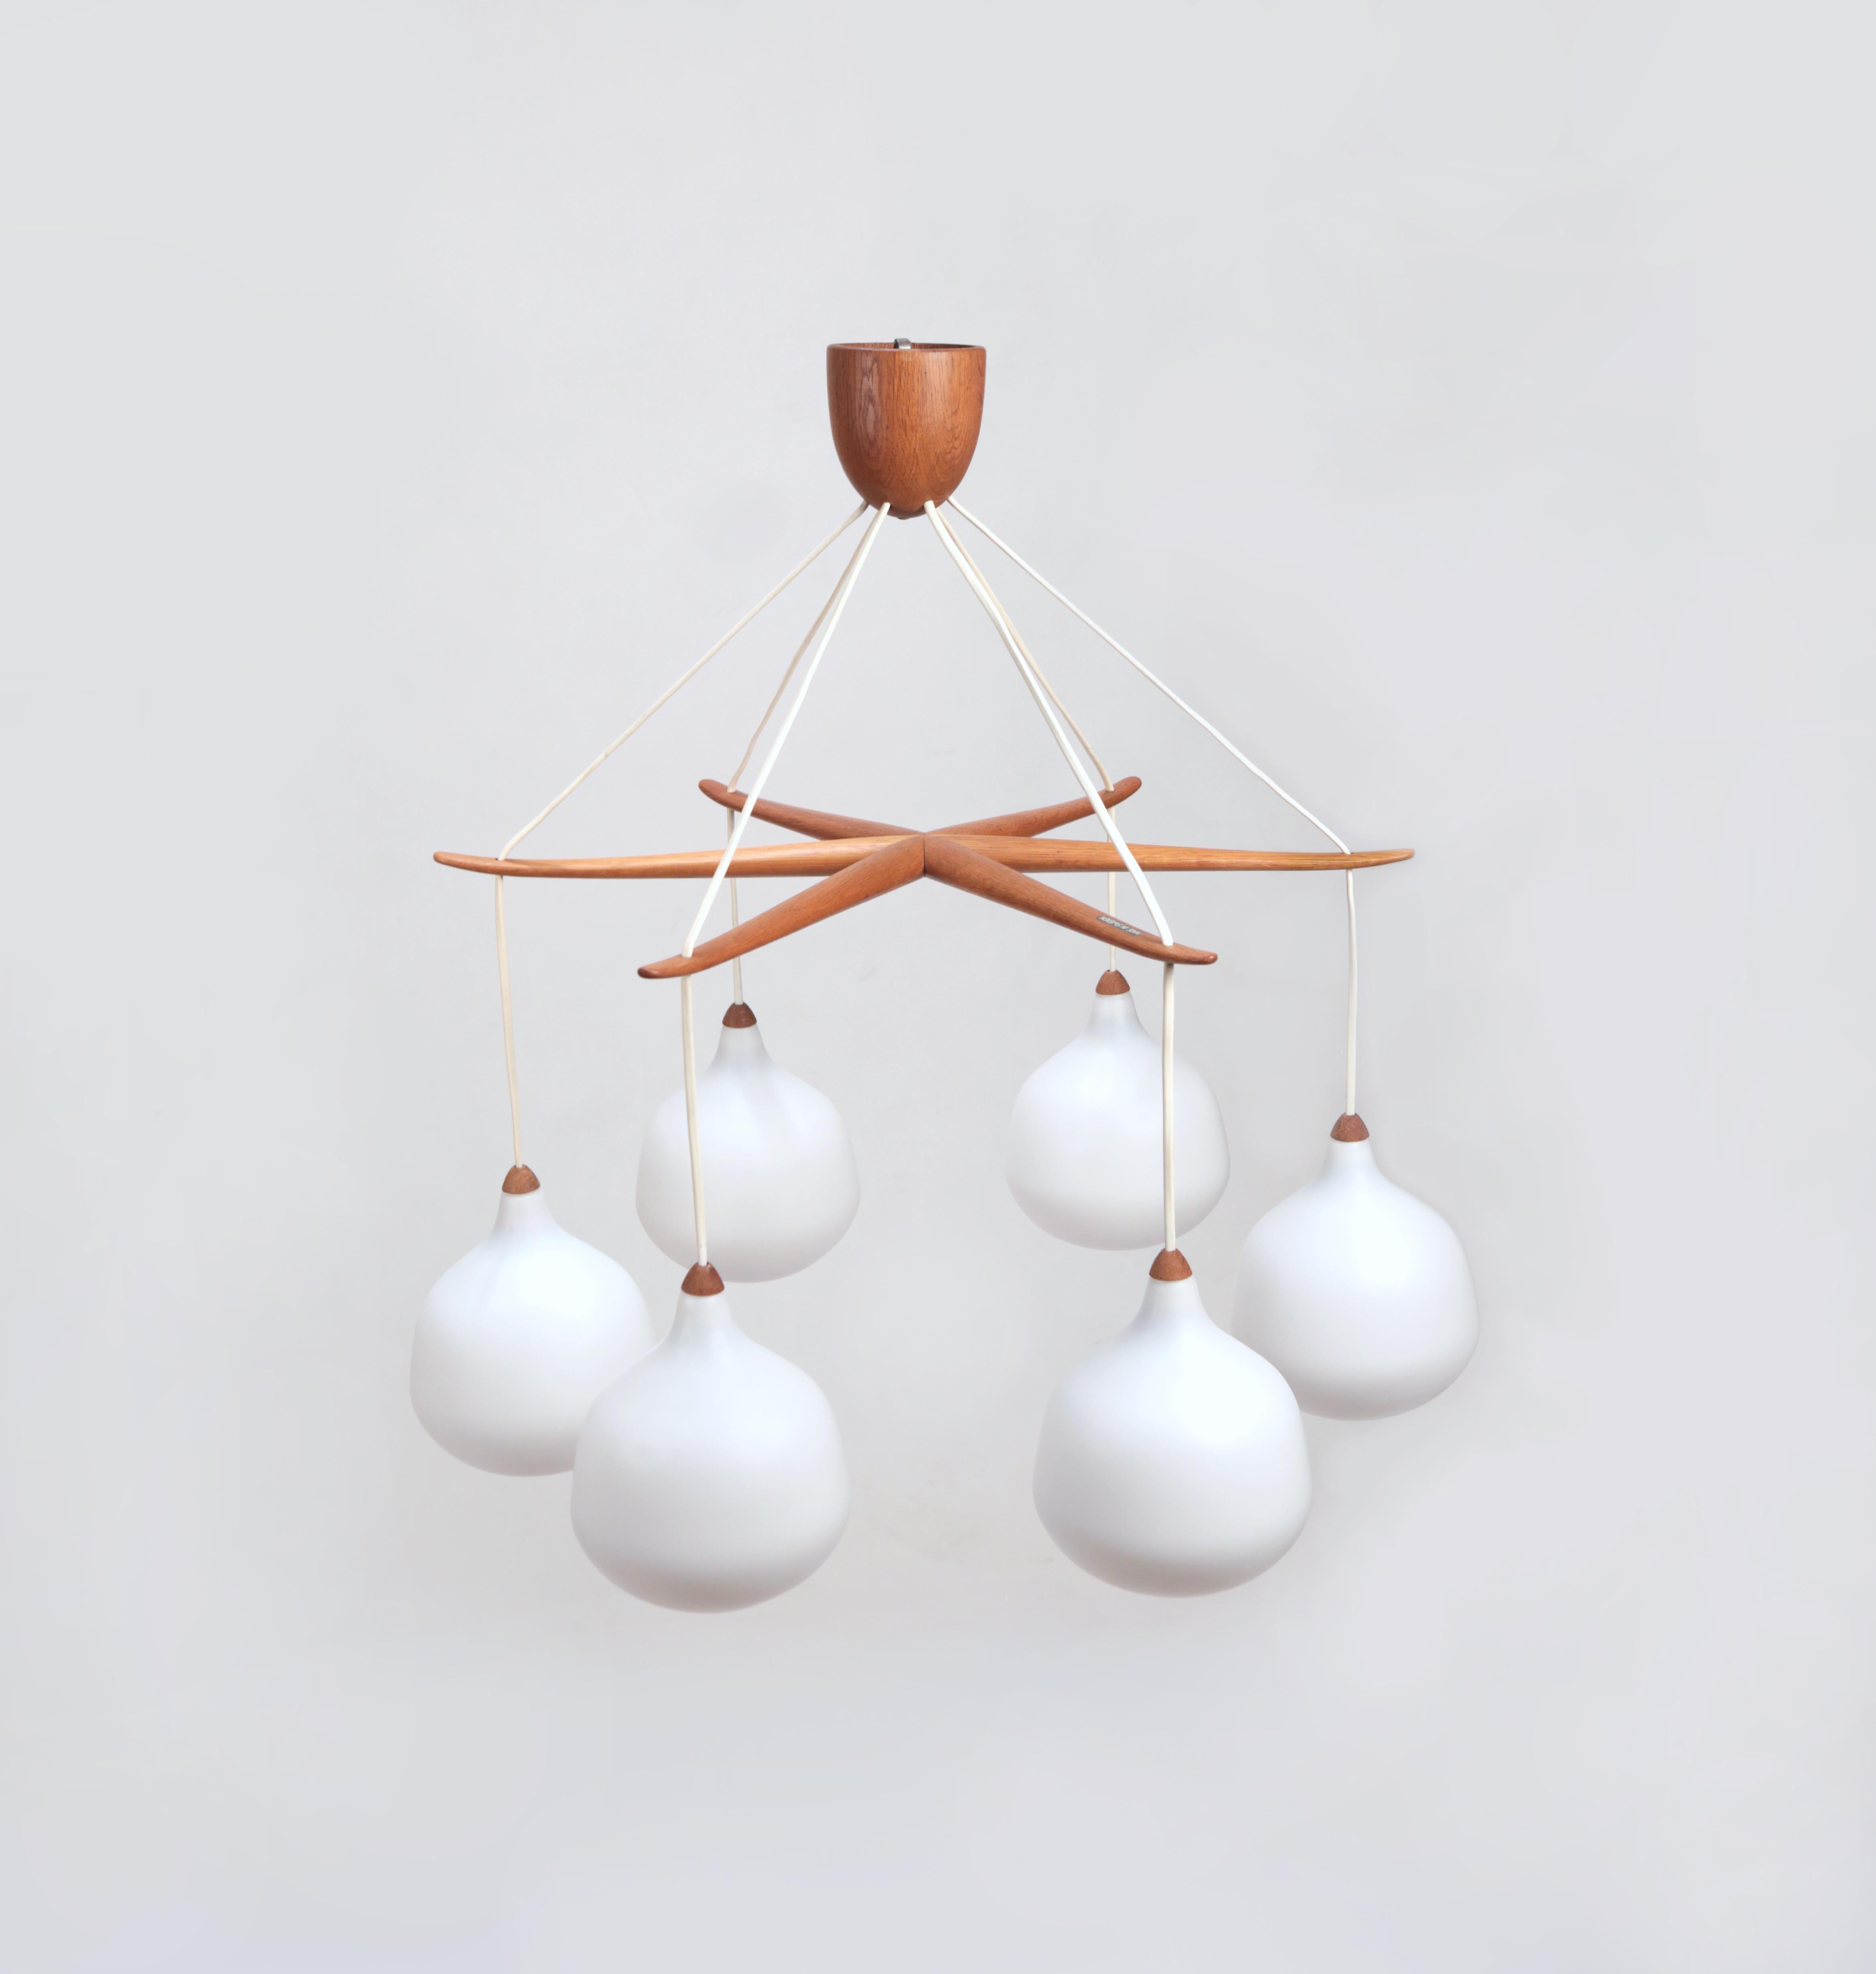 Uno & Östen Kristiansson 6 point star chandelier model 529 Luxus, Sweden, 1950s

Made of oak and opaline glass this chandelier is in excellent condition. No chips or scratched in the glass and the makers mark is clear on the top of one of the